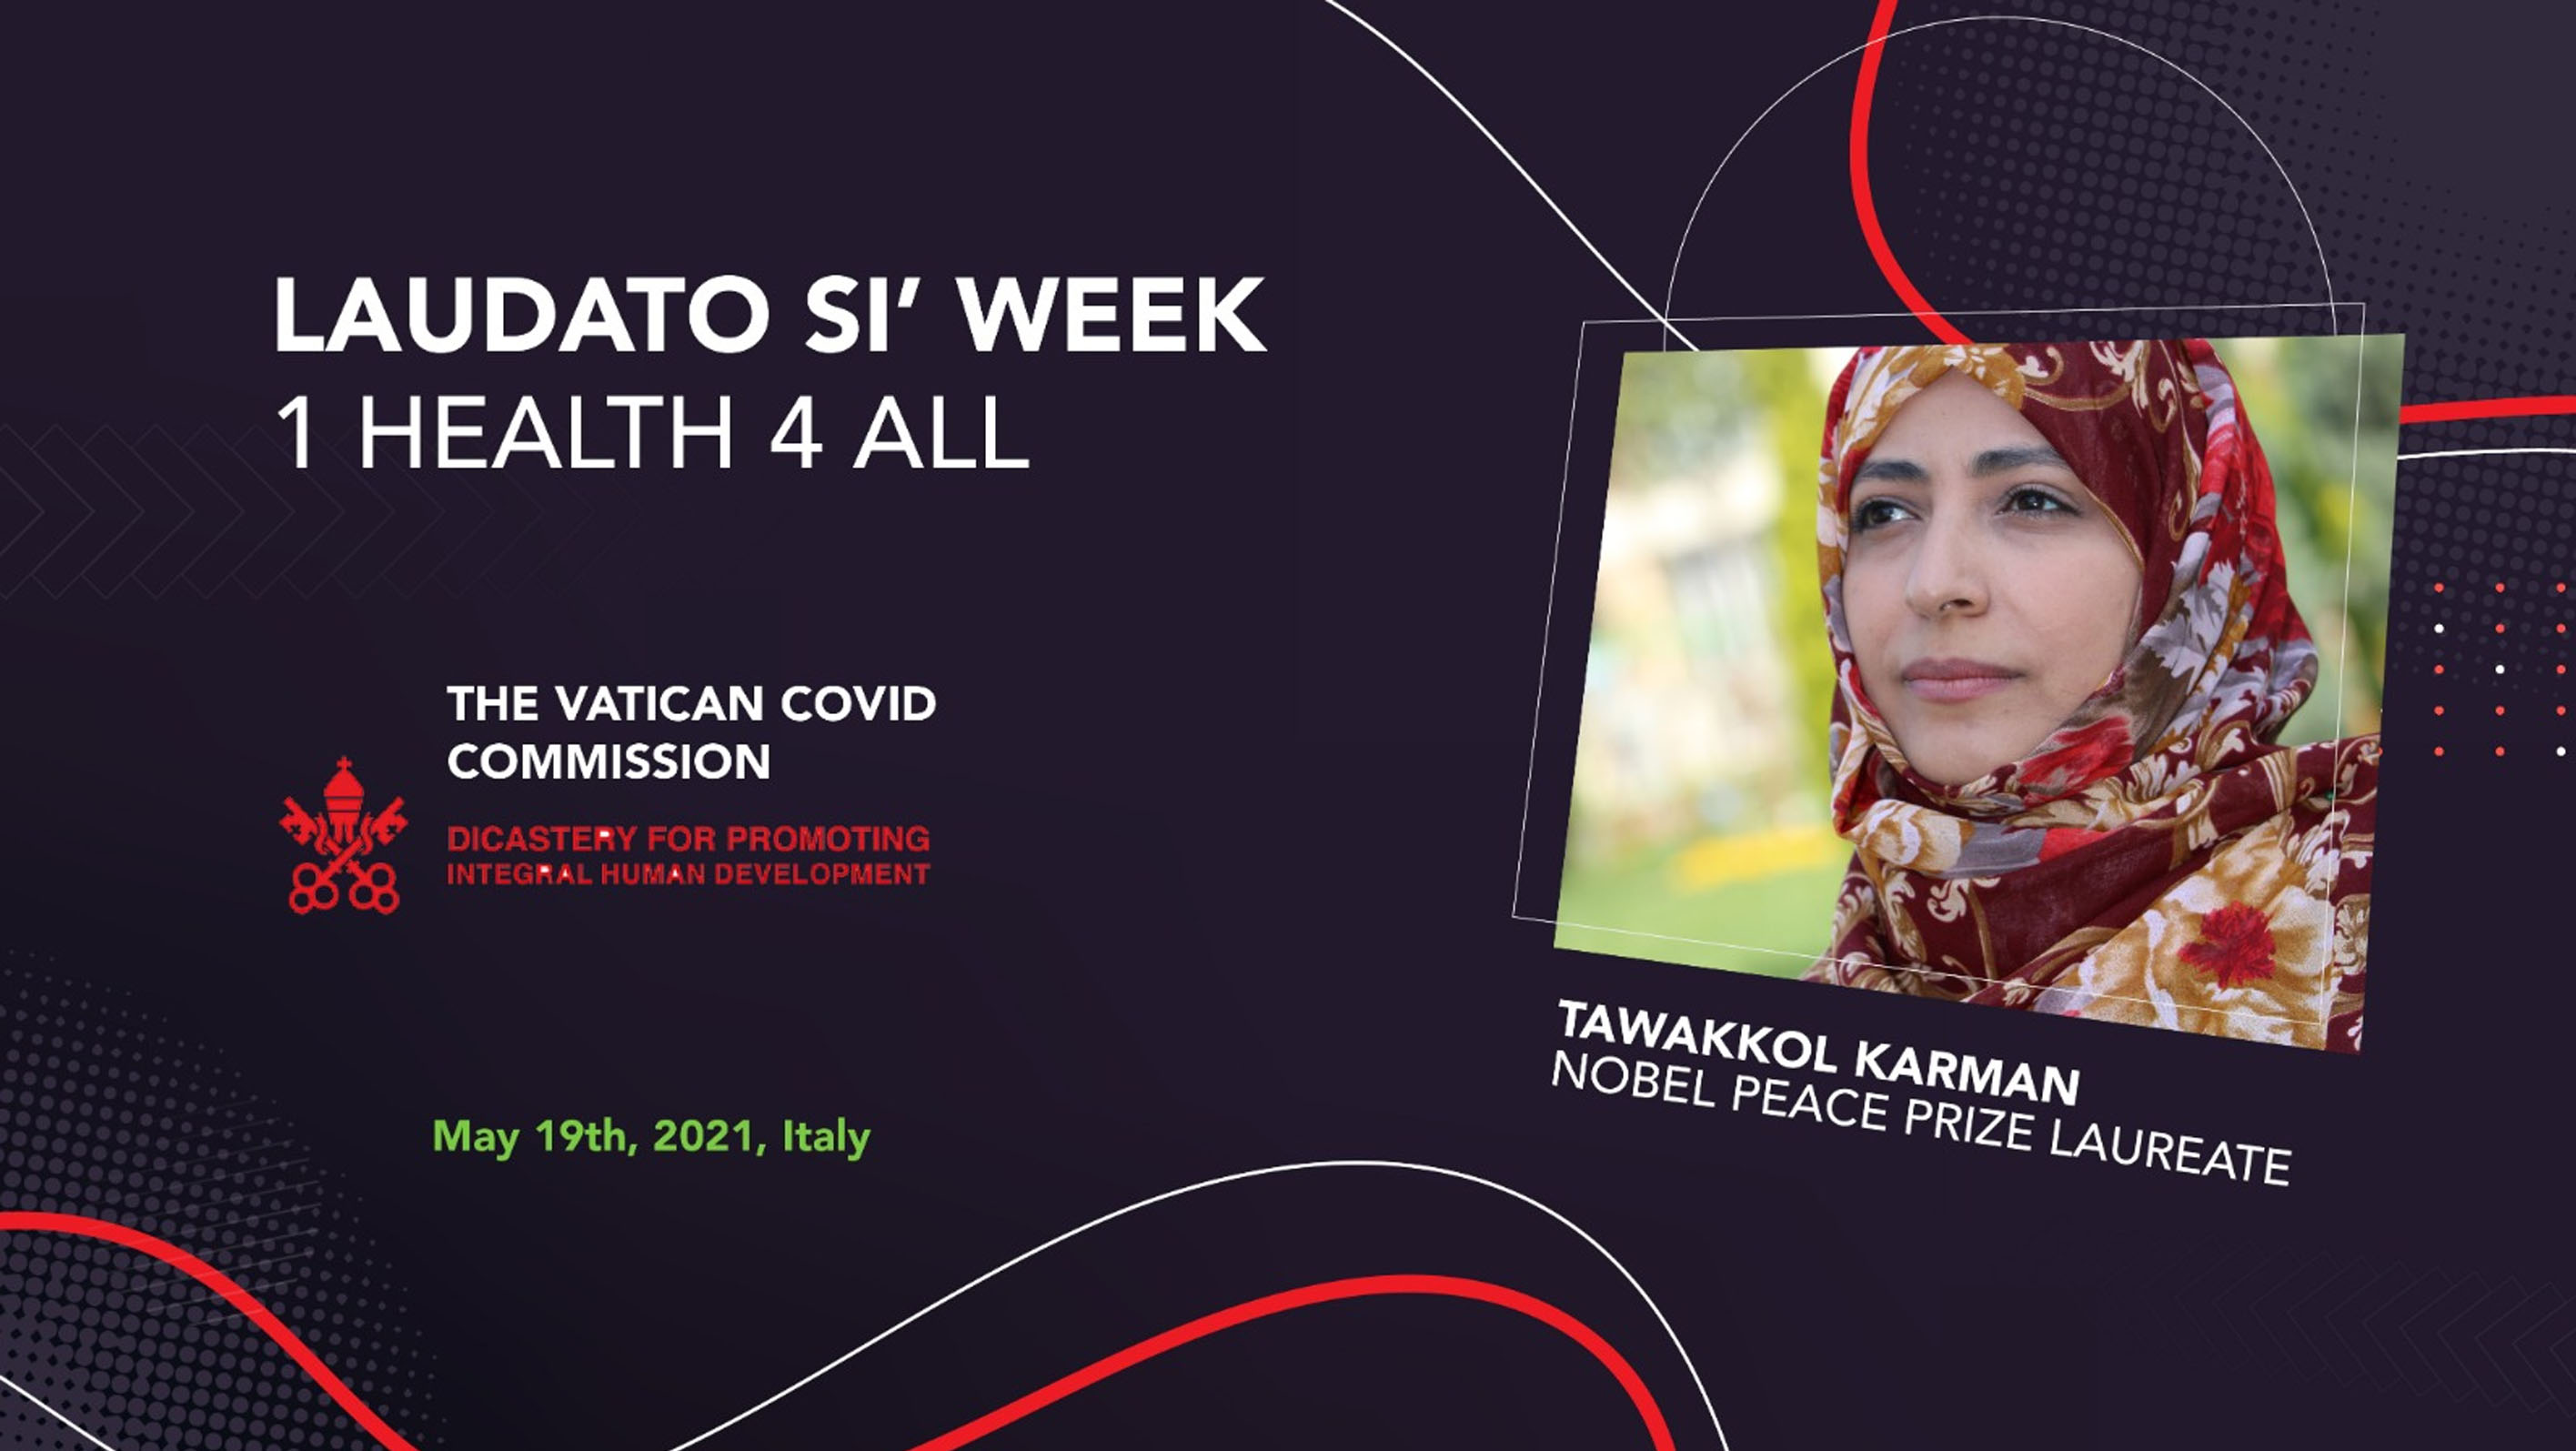 Tawakkol Karman receives invitation from Vatican to participate in ONE Health for All